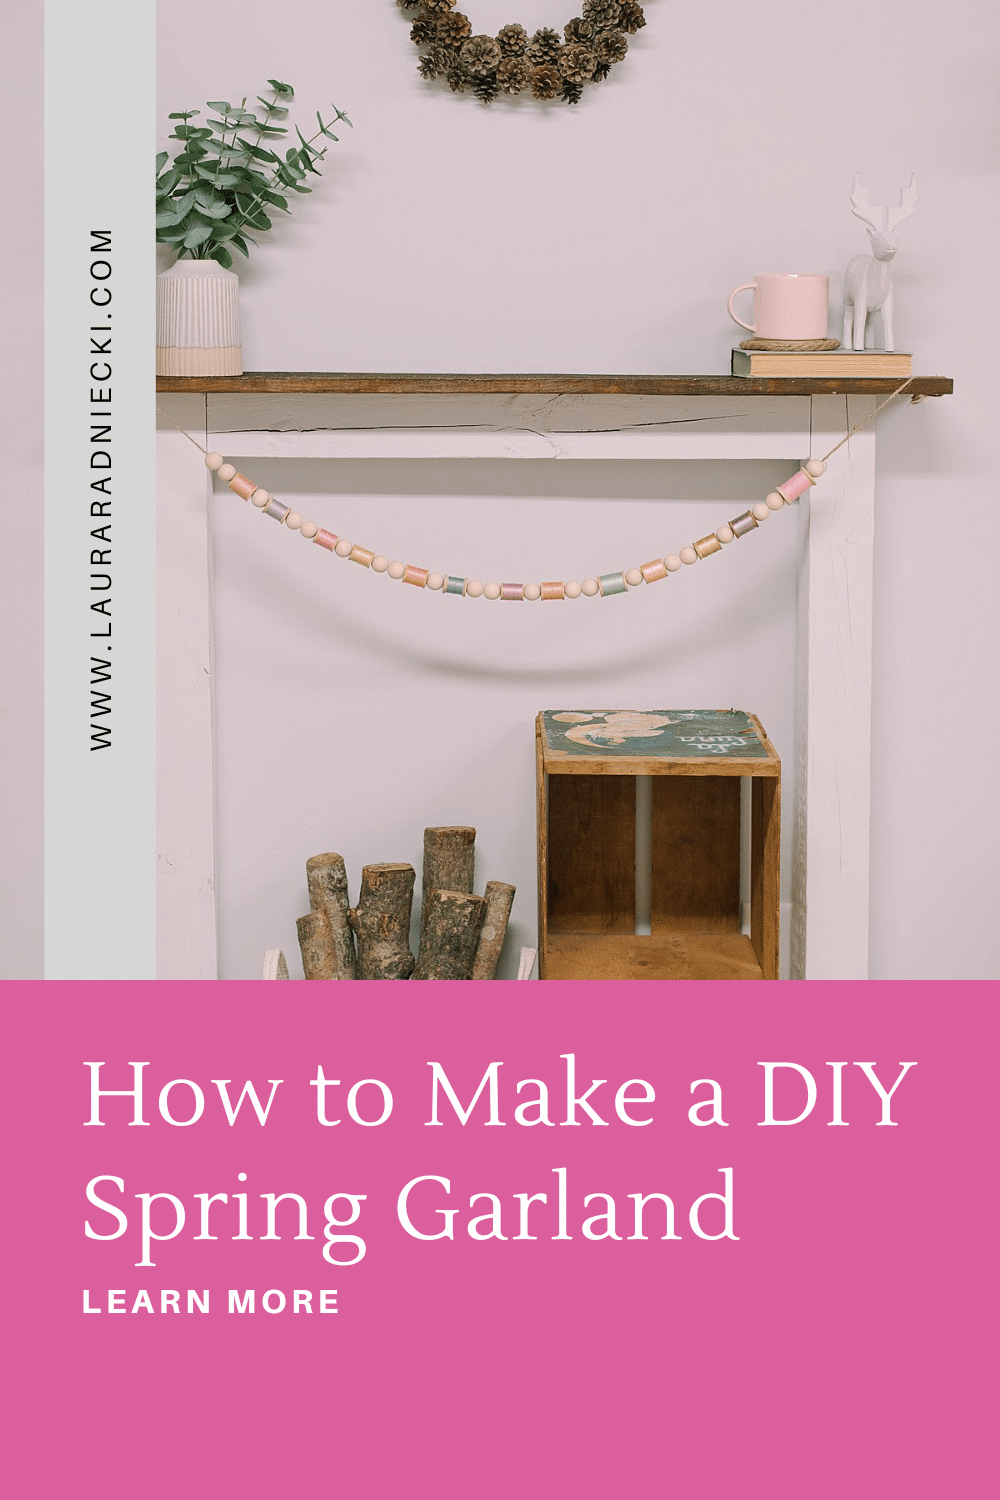 How to Make a Spring Garland bade with Wood Beads and Vintage Wood Thread Spools